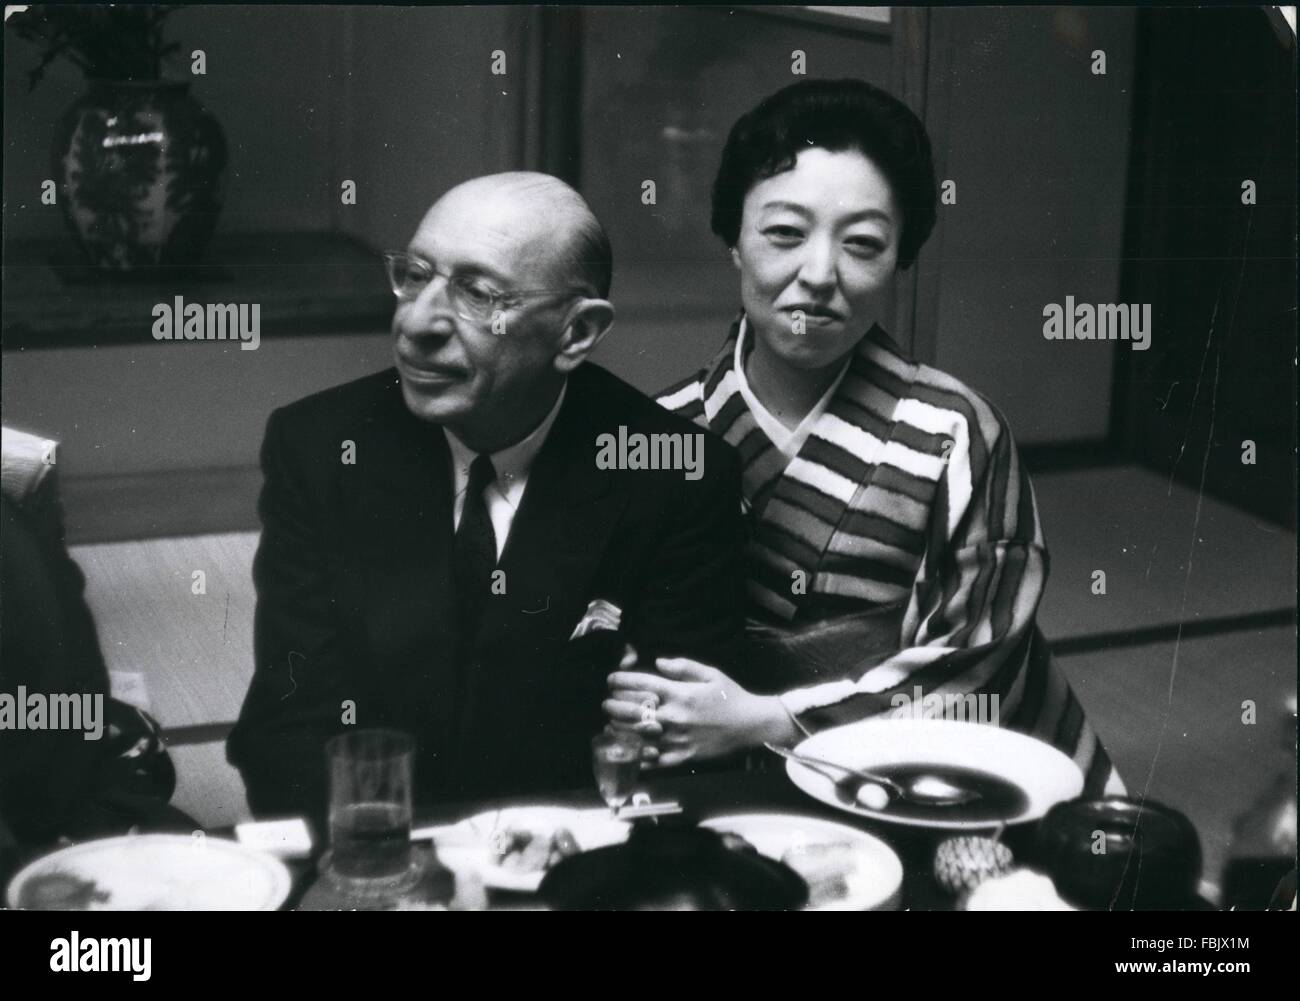 1962 - Igor Stravinsky with the Geishas. Igor Stravinsky, the celebrated composer and conductor, who is at present in Japan to direct the NHK Television and Radio Symphony Orchestra for the Osaka International Festival, is seen at a Geisha party given in his and Mrs. Stravinsky' honour at Tokyo Geisha house. Photo shows Igor Stravinsky with the celebrated Geisha named Hanko during the Japanese dinner. © Keystone Pictures USA/ZUMAPRESS.com/Alamy Live News Stock Photo